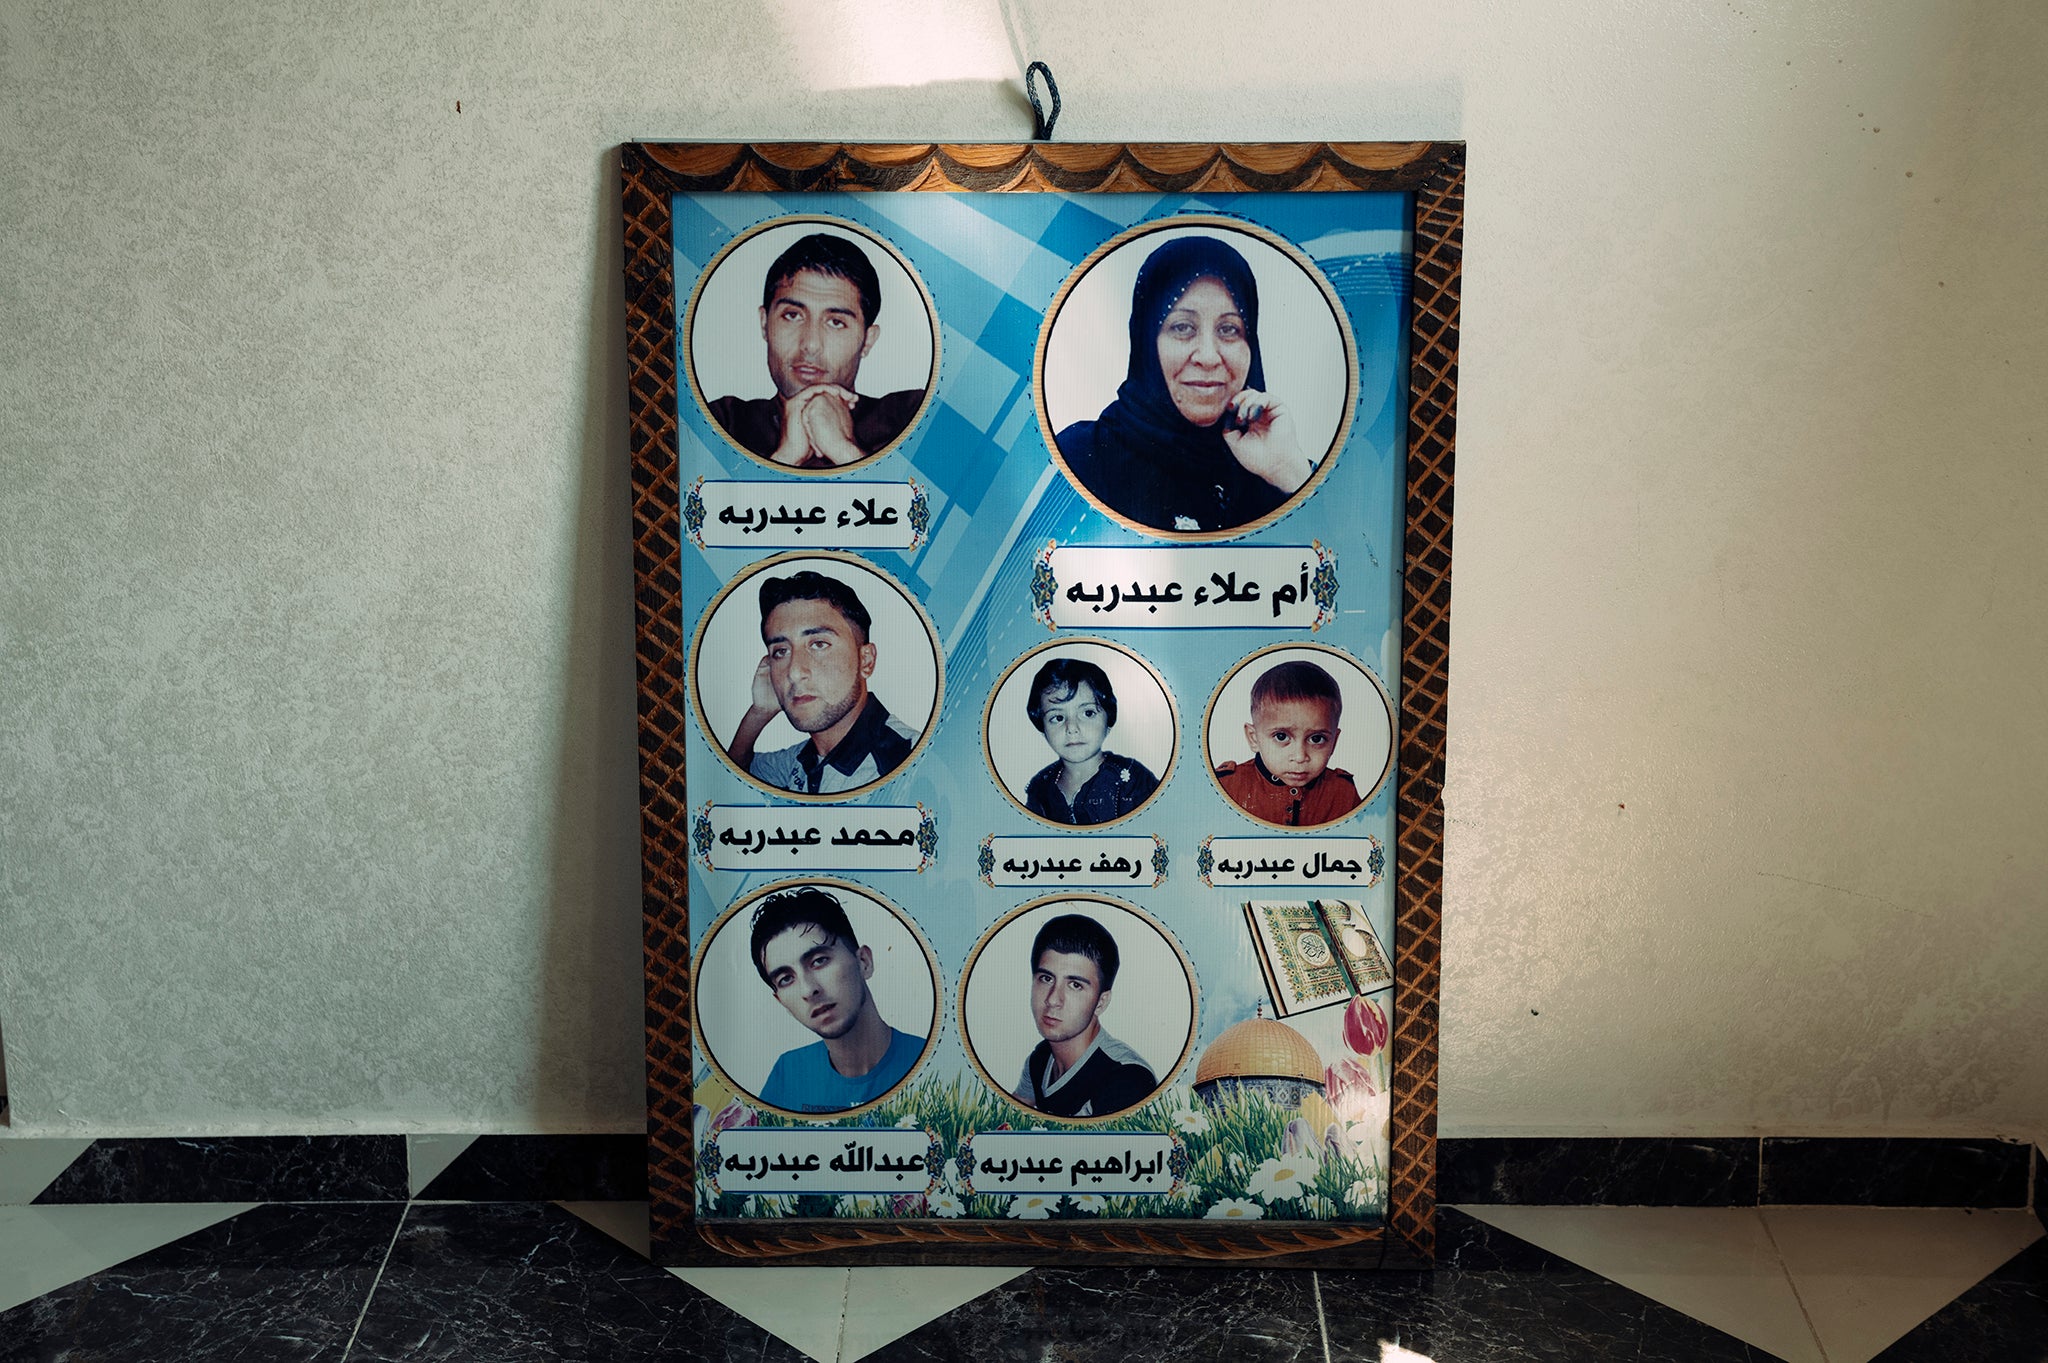 A framed poster in Baraka’s family home, showing the faces and names of some of the family members who were killed while seeking shelter